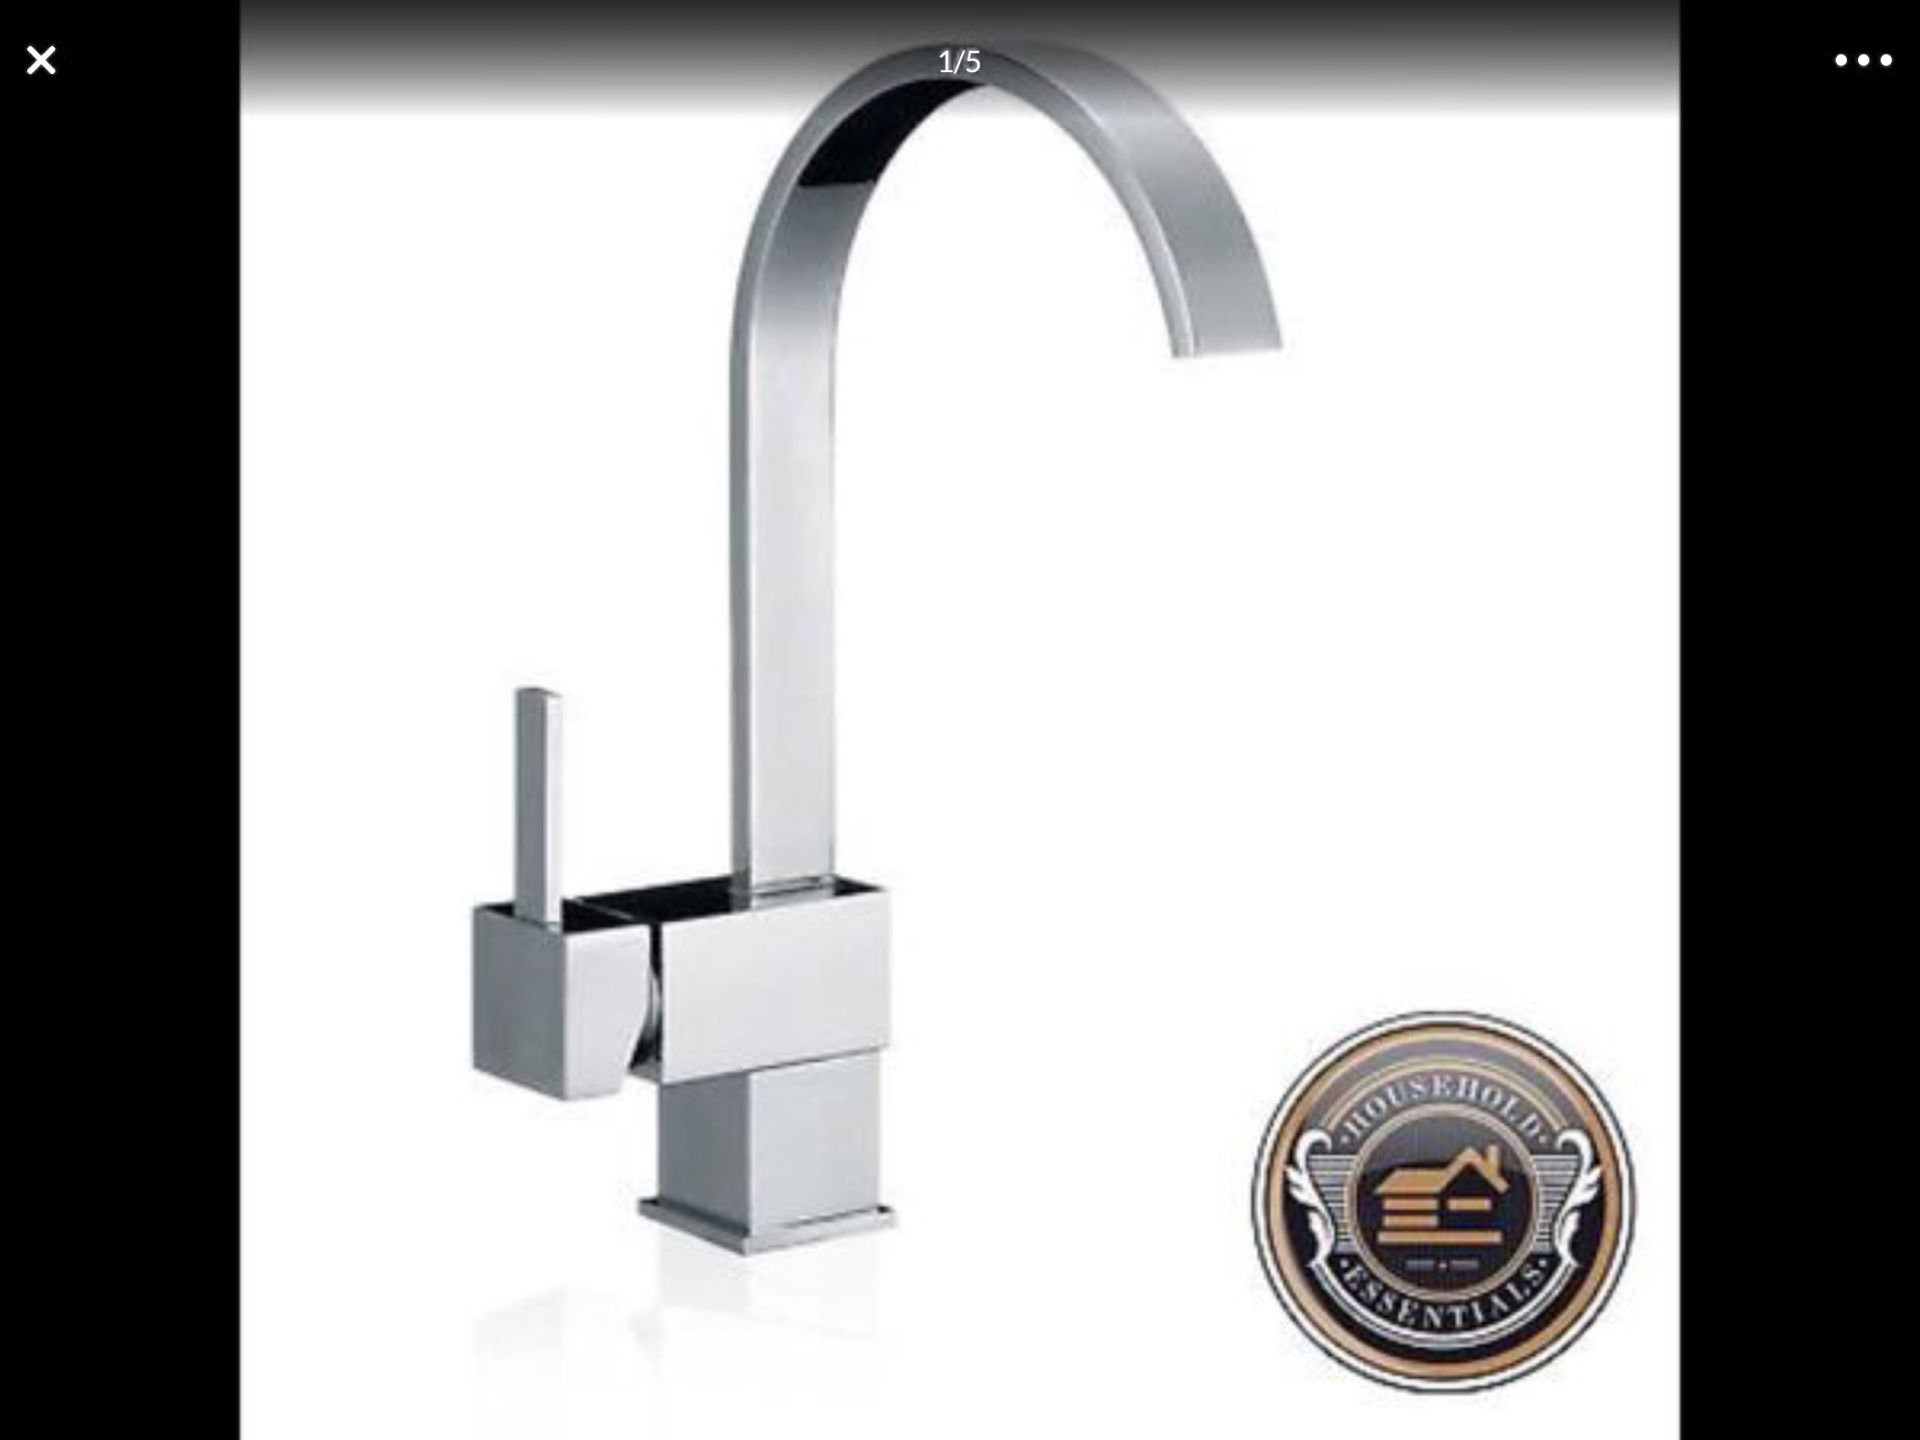 13" Chrome Modern Kitchen / Bathroom Sink Faucet - One Hole / Handle..... CHECK OUT MY PAGE FOR MORE ITEMS